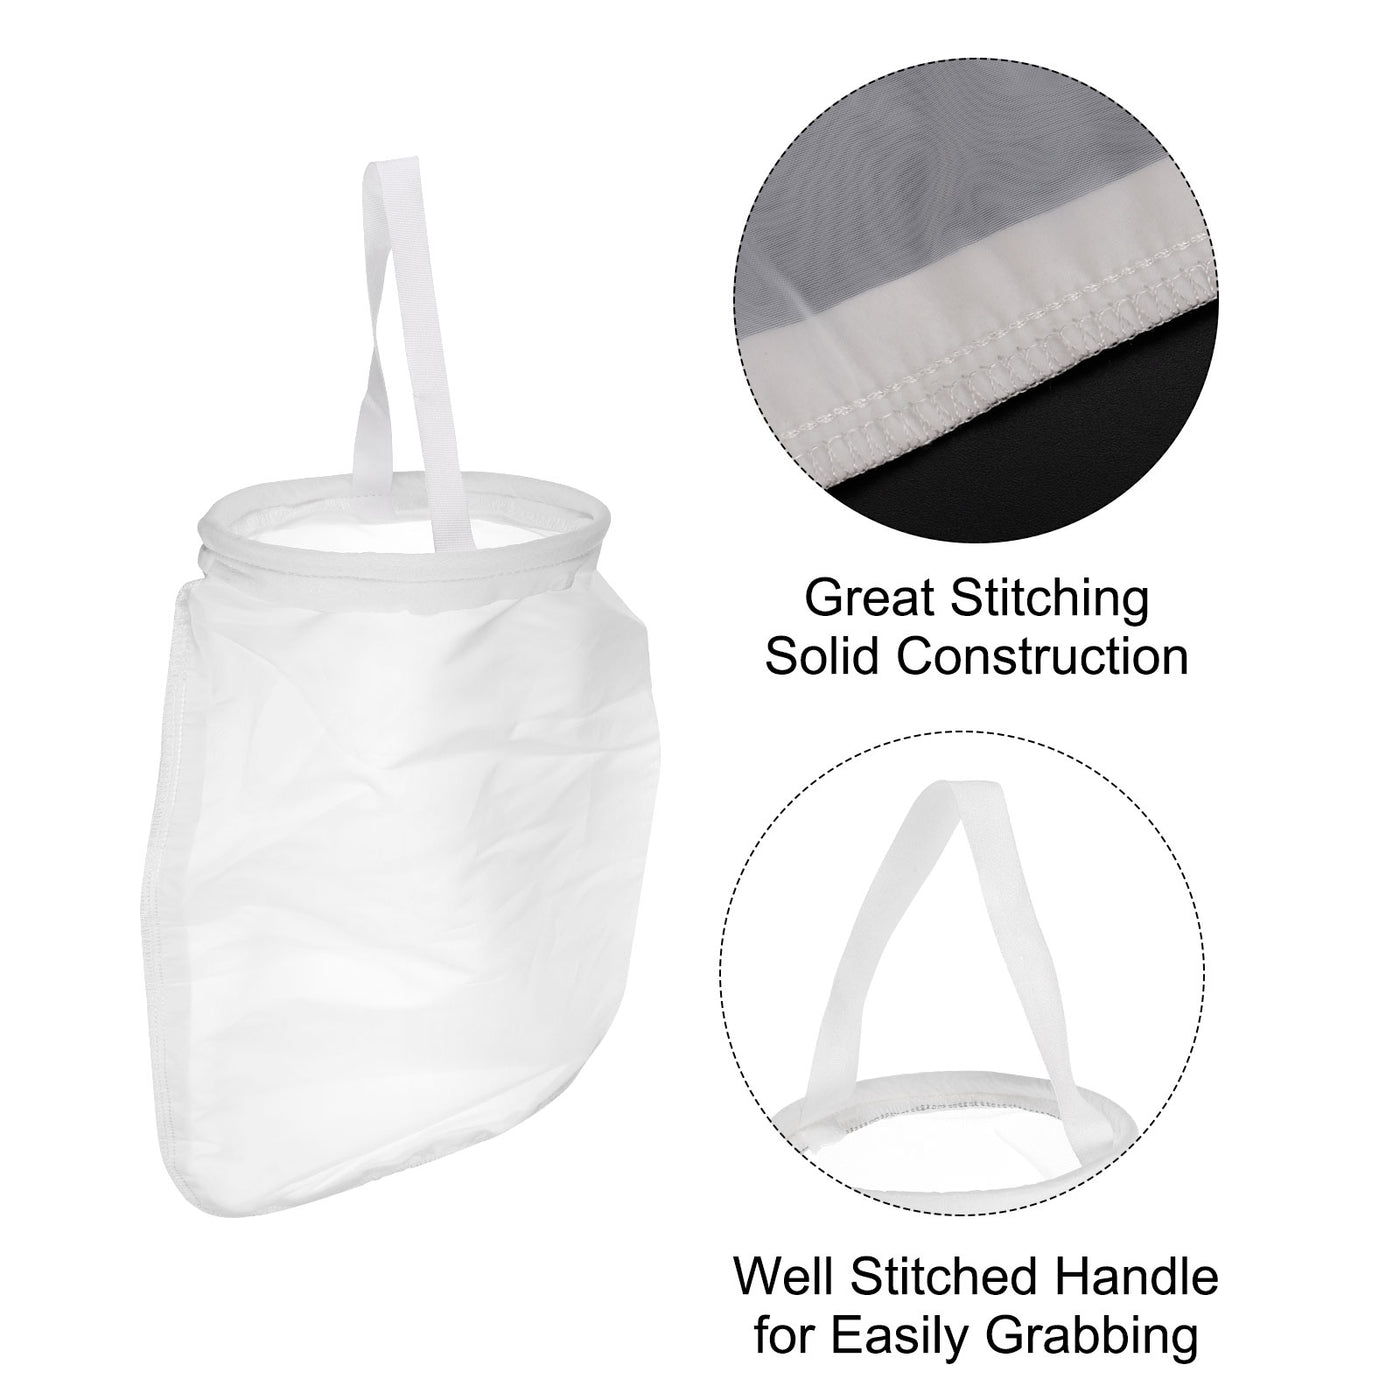 uxcell Uxcell Paint Filter Bag 200 Mesh (16.9"x7") Nylon Strainer for Filtering Paint